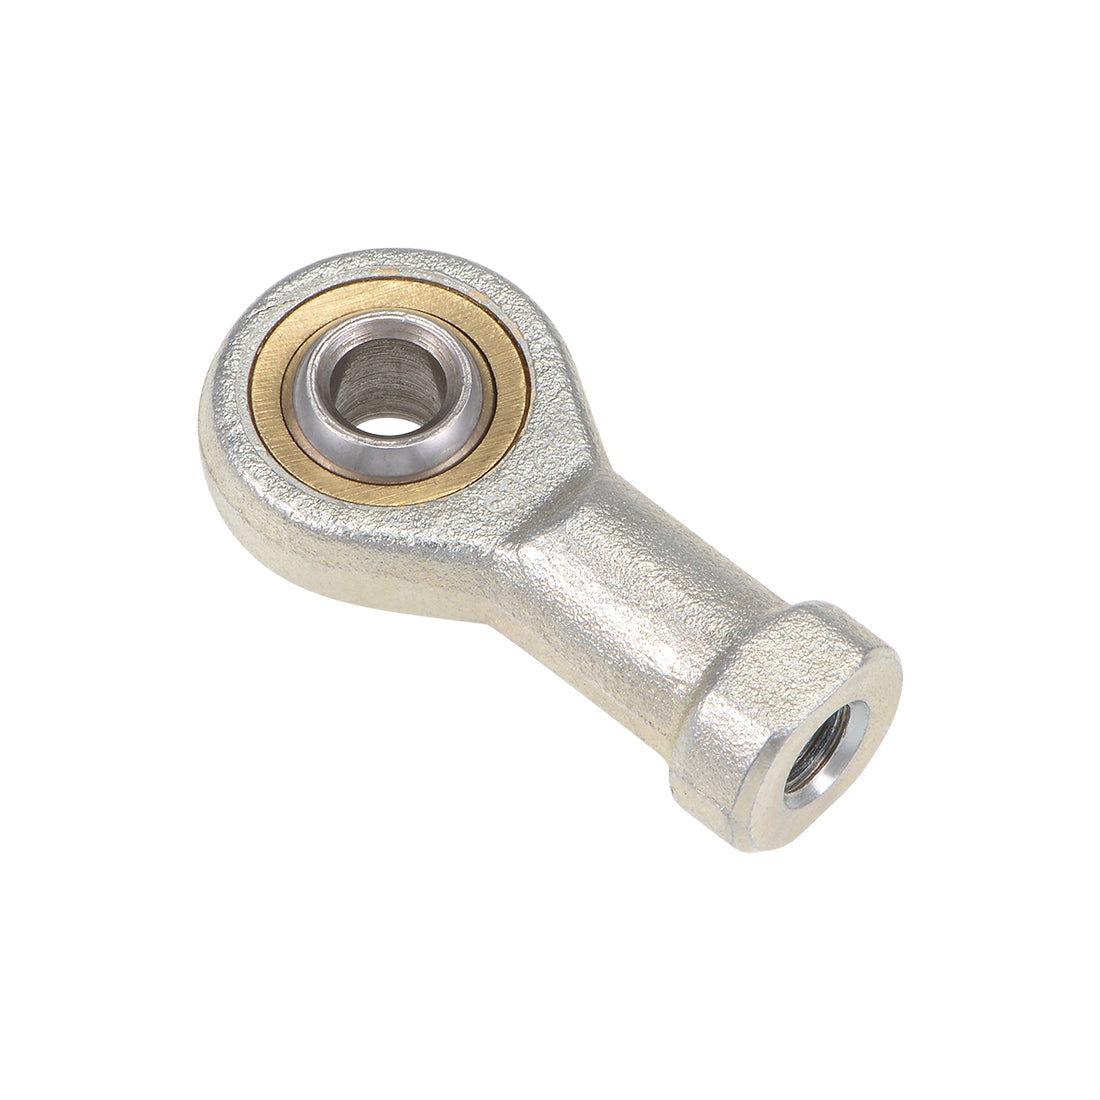 uxcell Uxcell 6mm Rod End Bearing M6x1.0mm Rod Ends Ball Joint Female Right Hand Thread